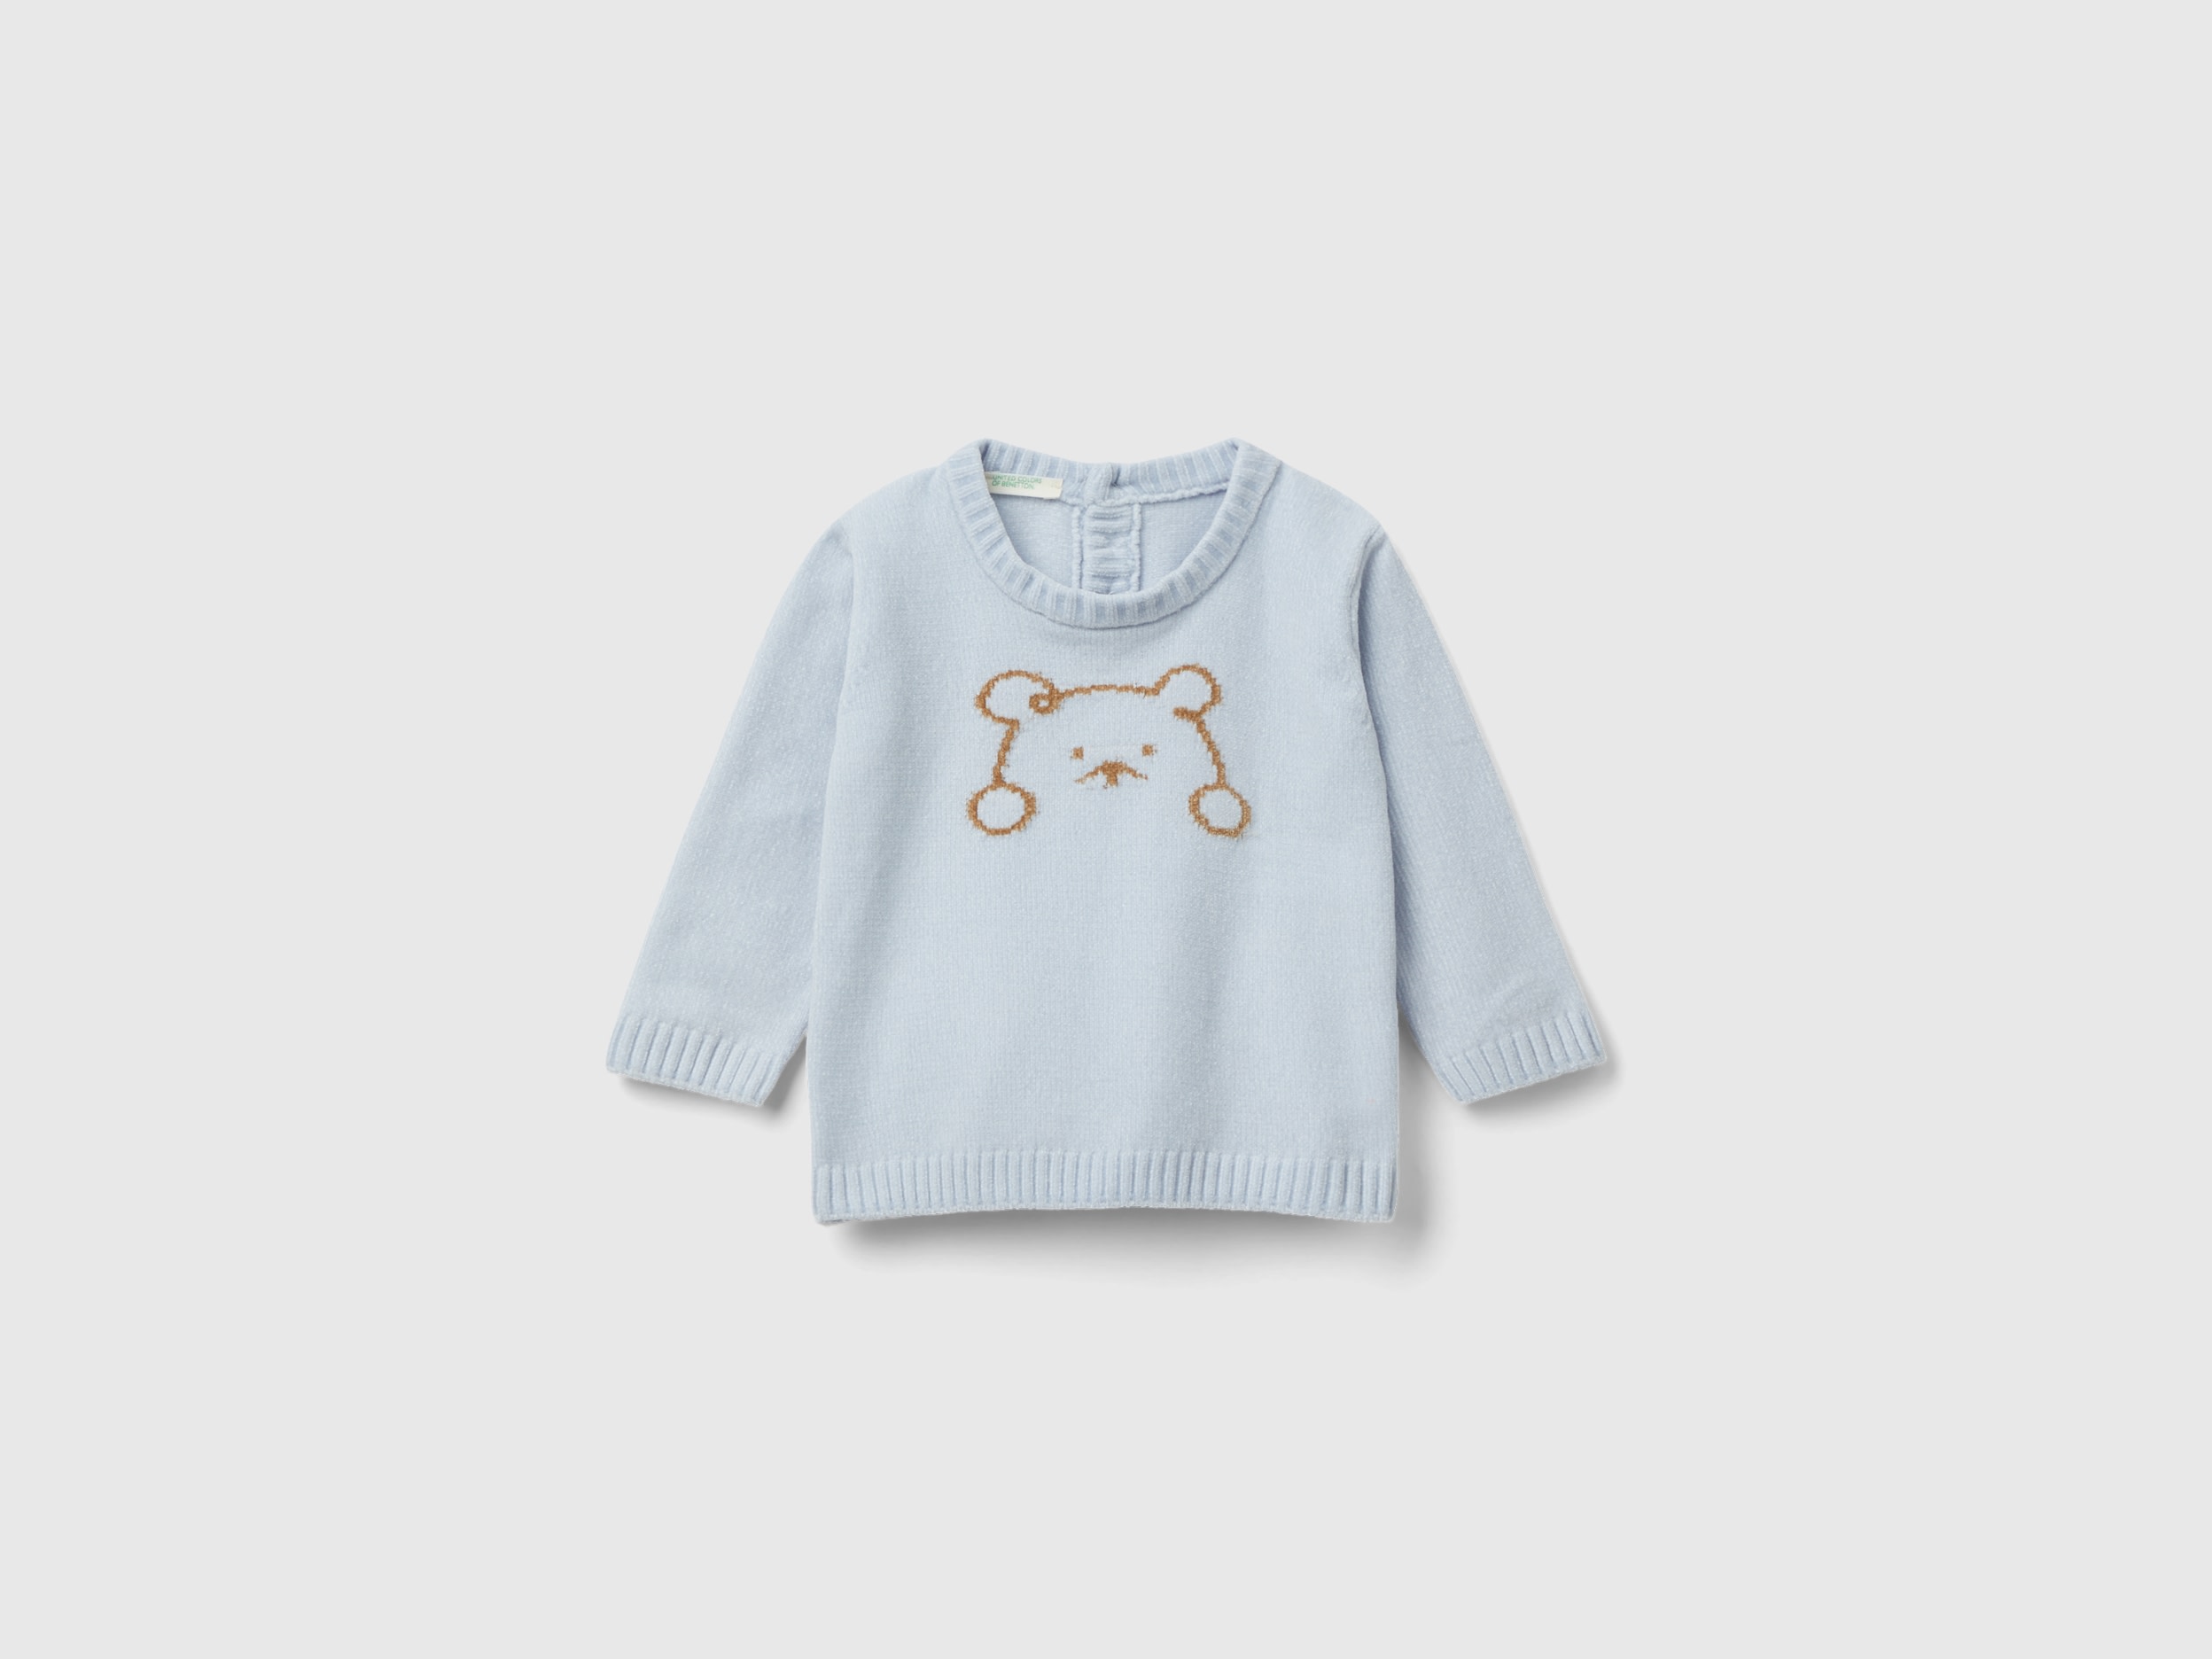 Benetton, Chenille Sweater With Inlay, size 6-9, Sky Blue, Kids